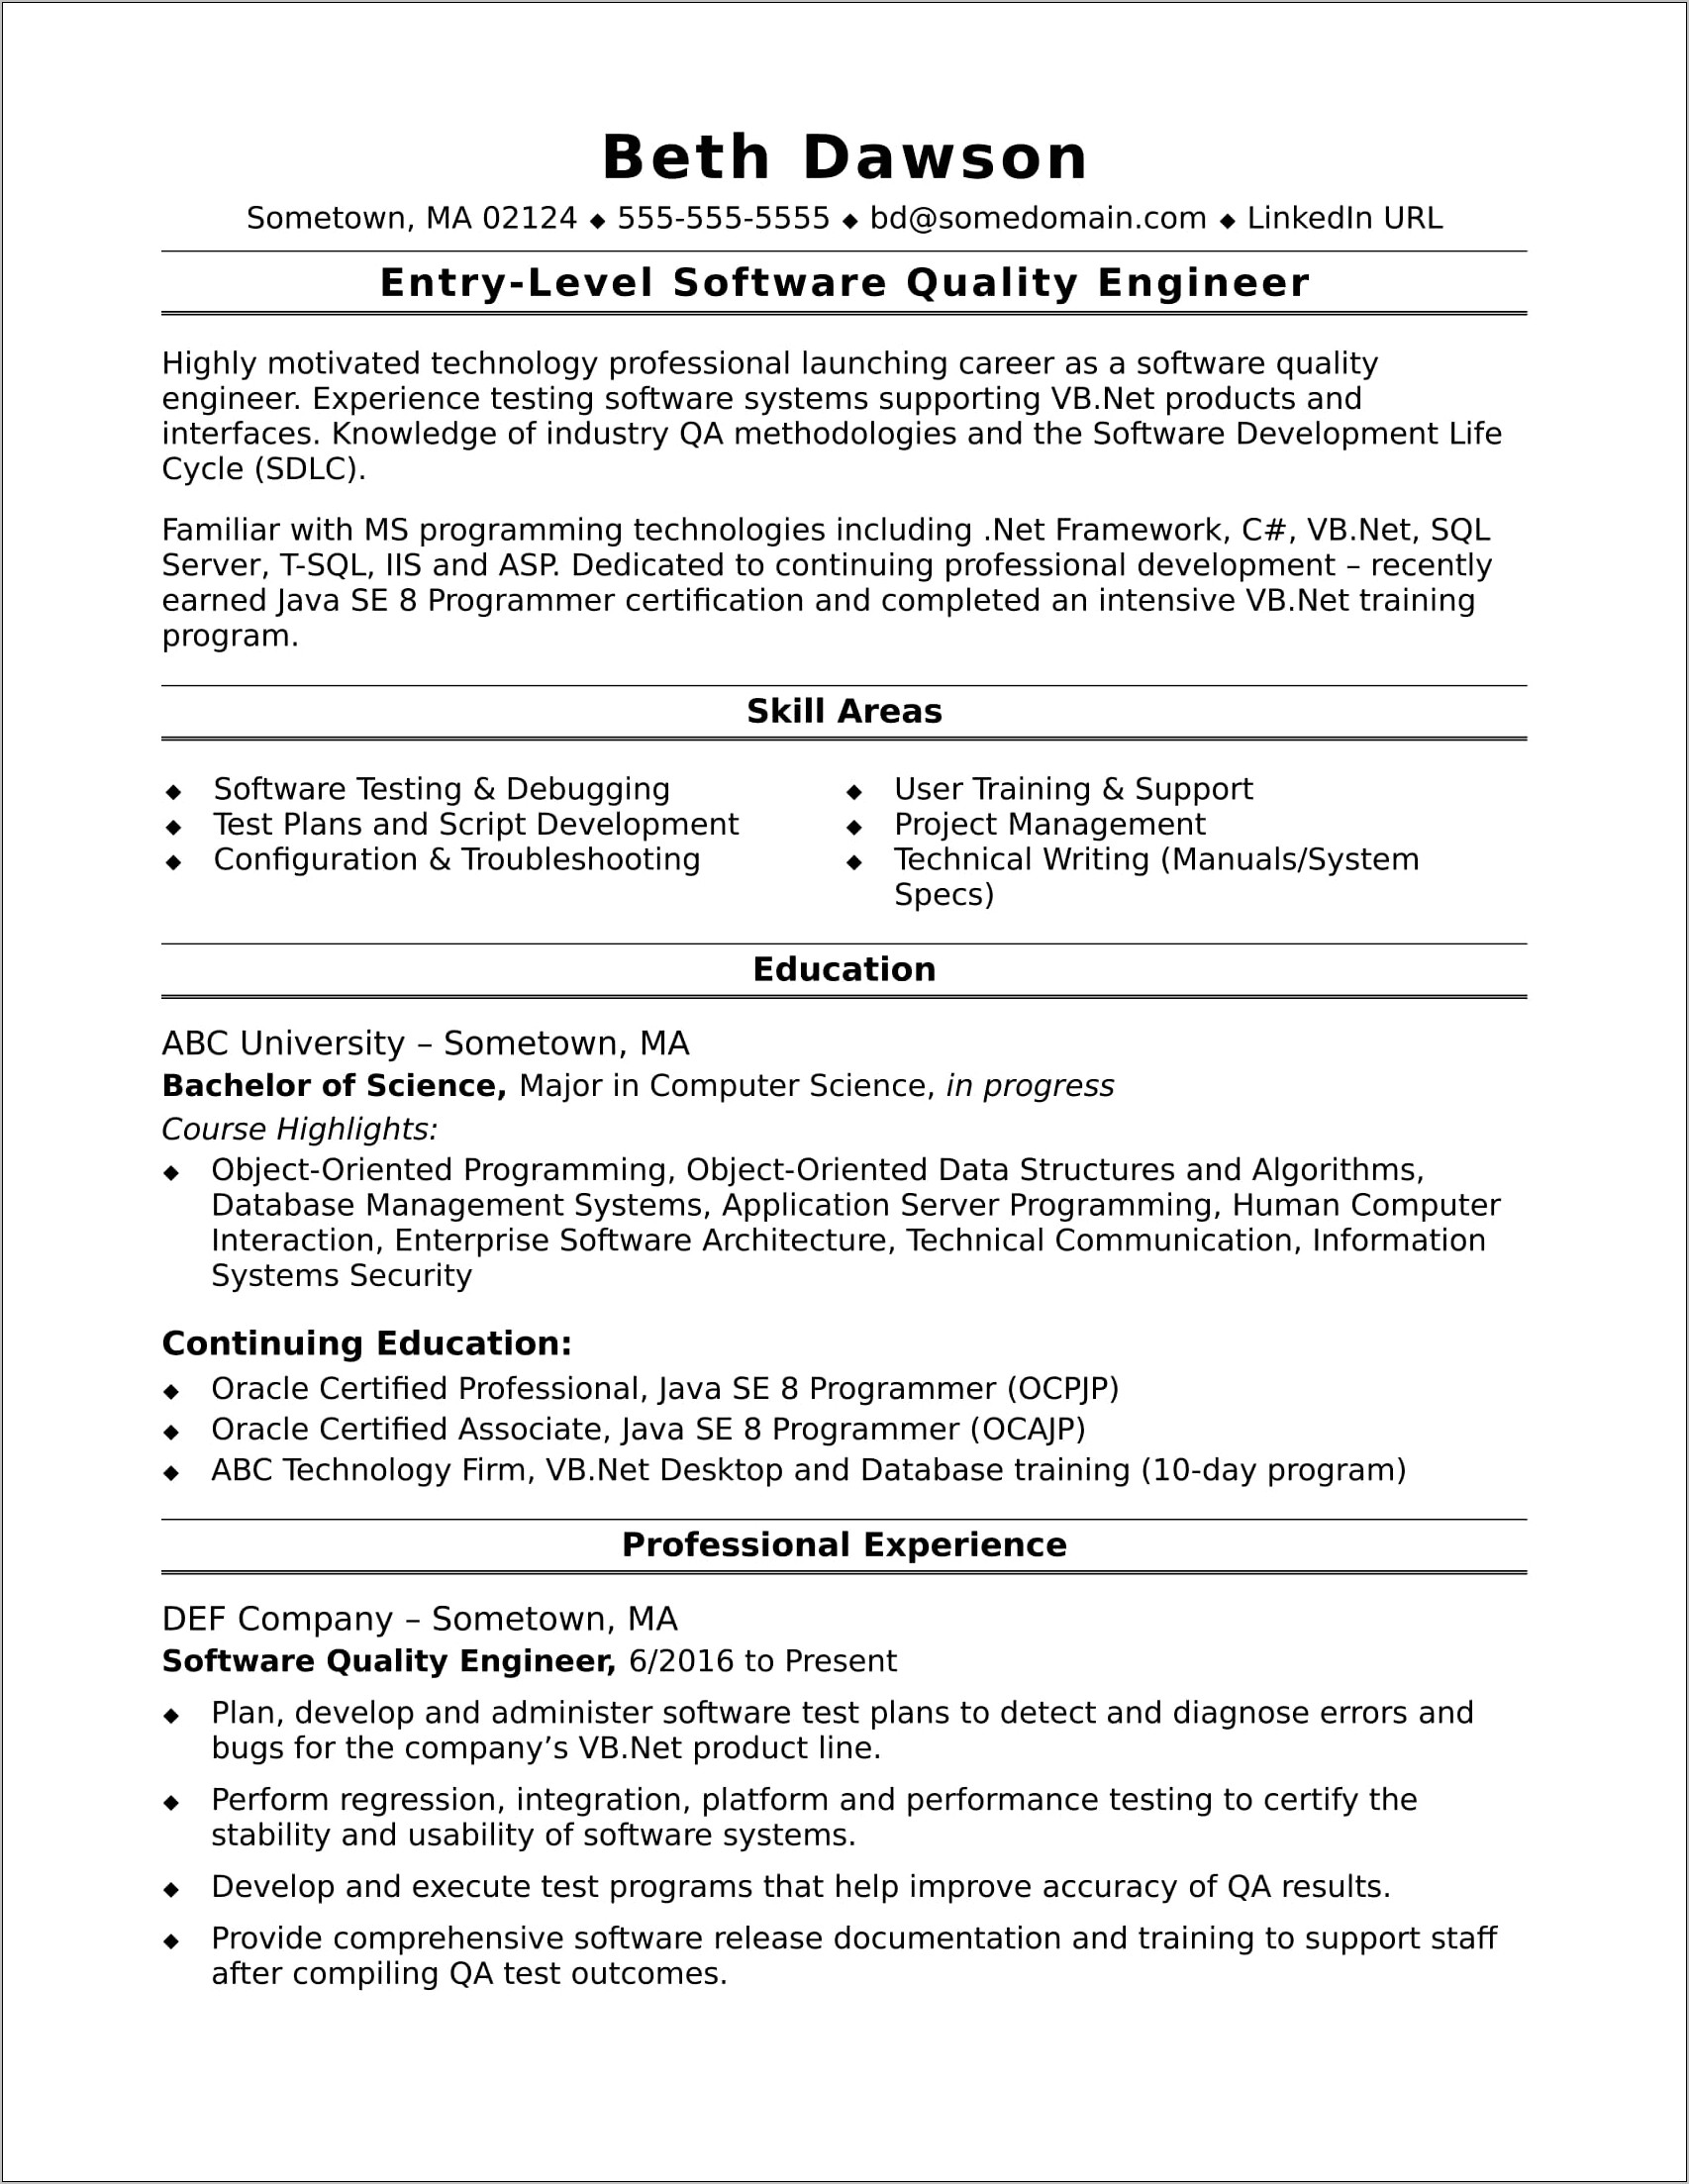 Samples Of Supplier Quality Engineer Resumes